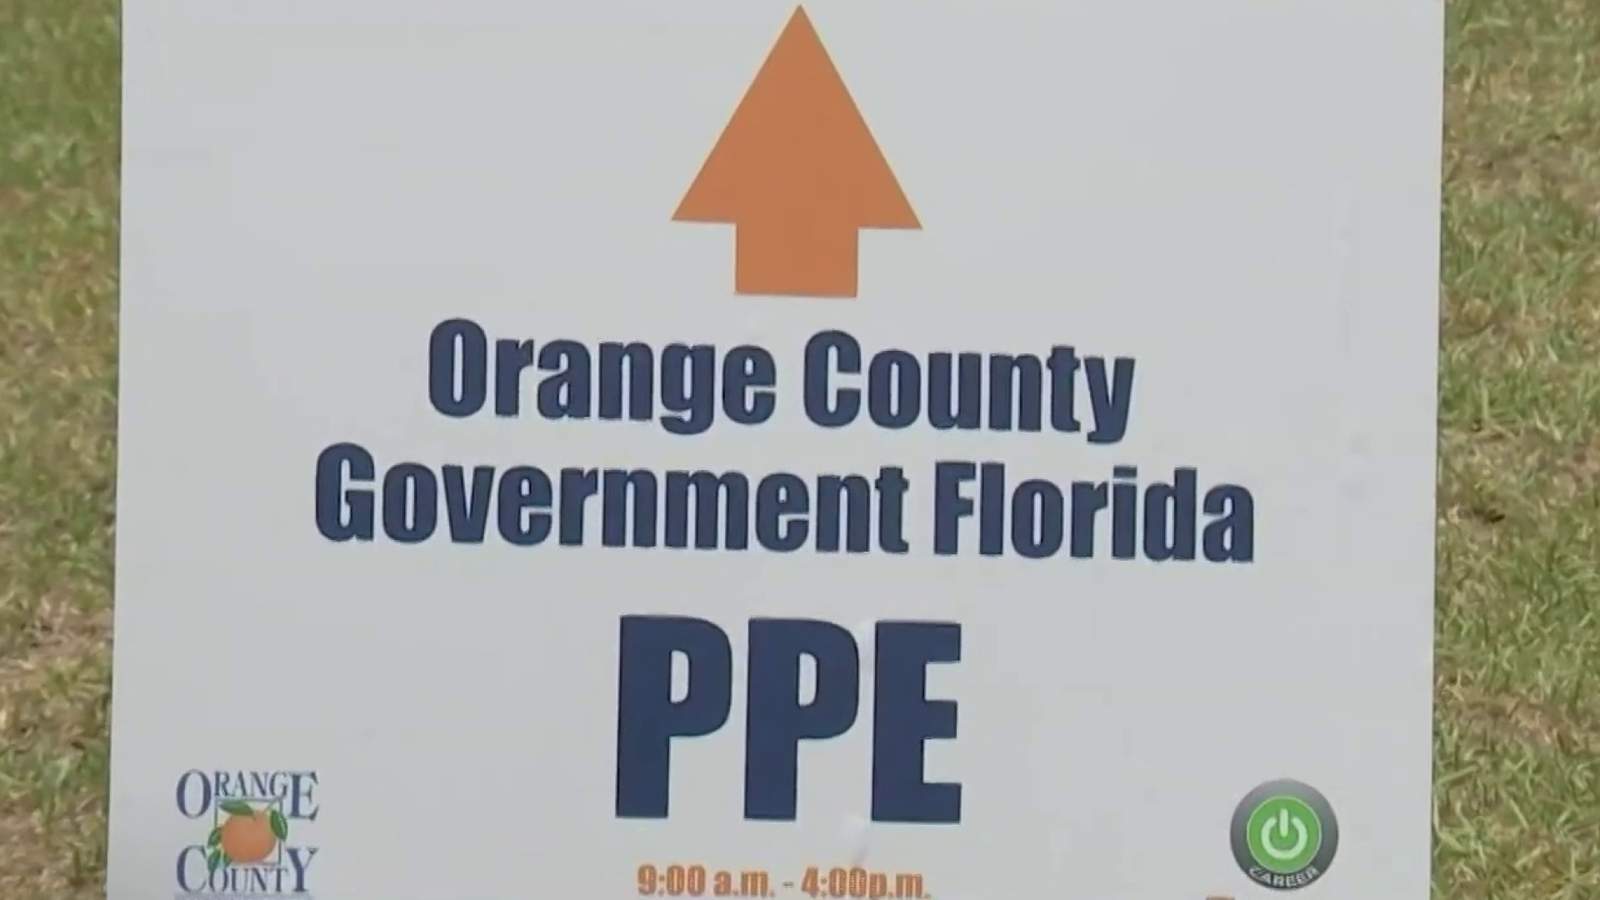 Free PPE supplies for small businesses extended in Orange County